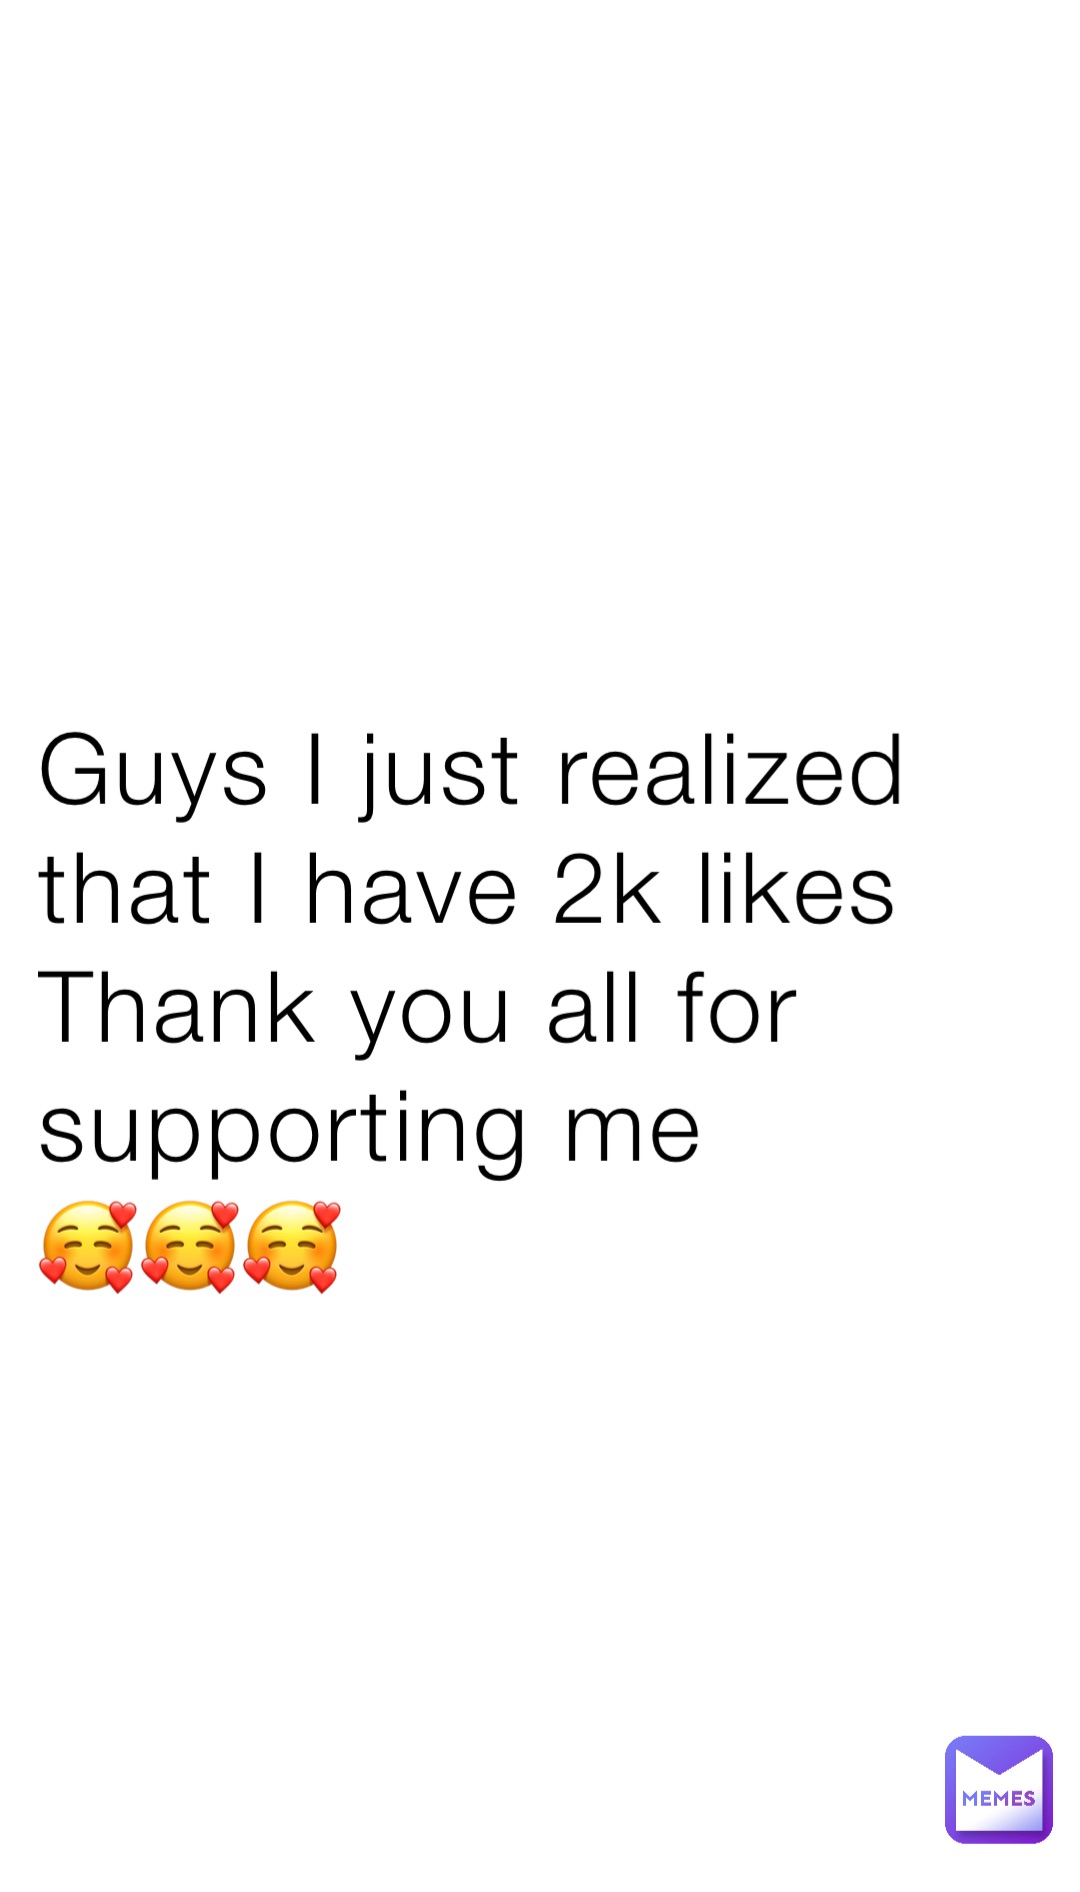 Guys I just realized that I have 2k likes 
Thank you all for supporting me 
🥰🥰🥰